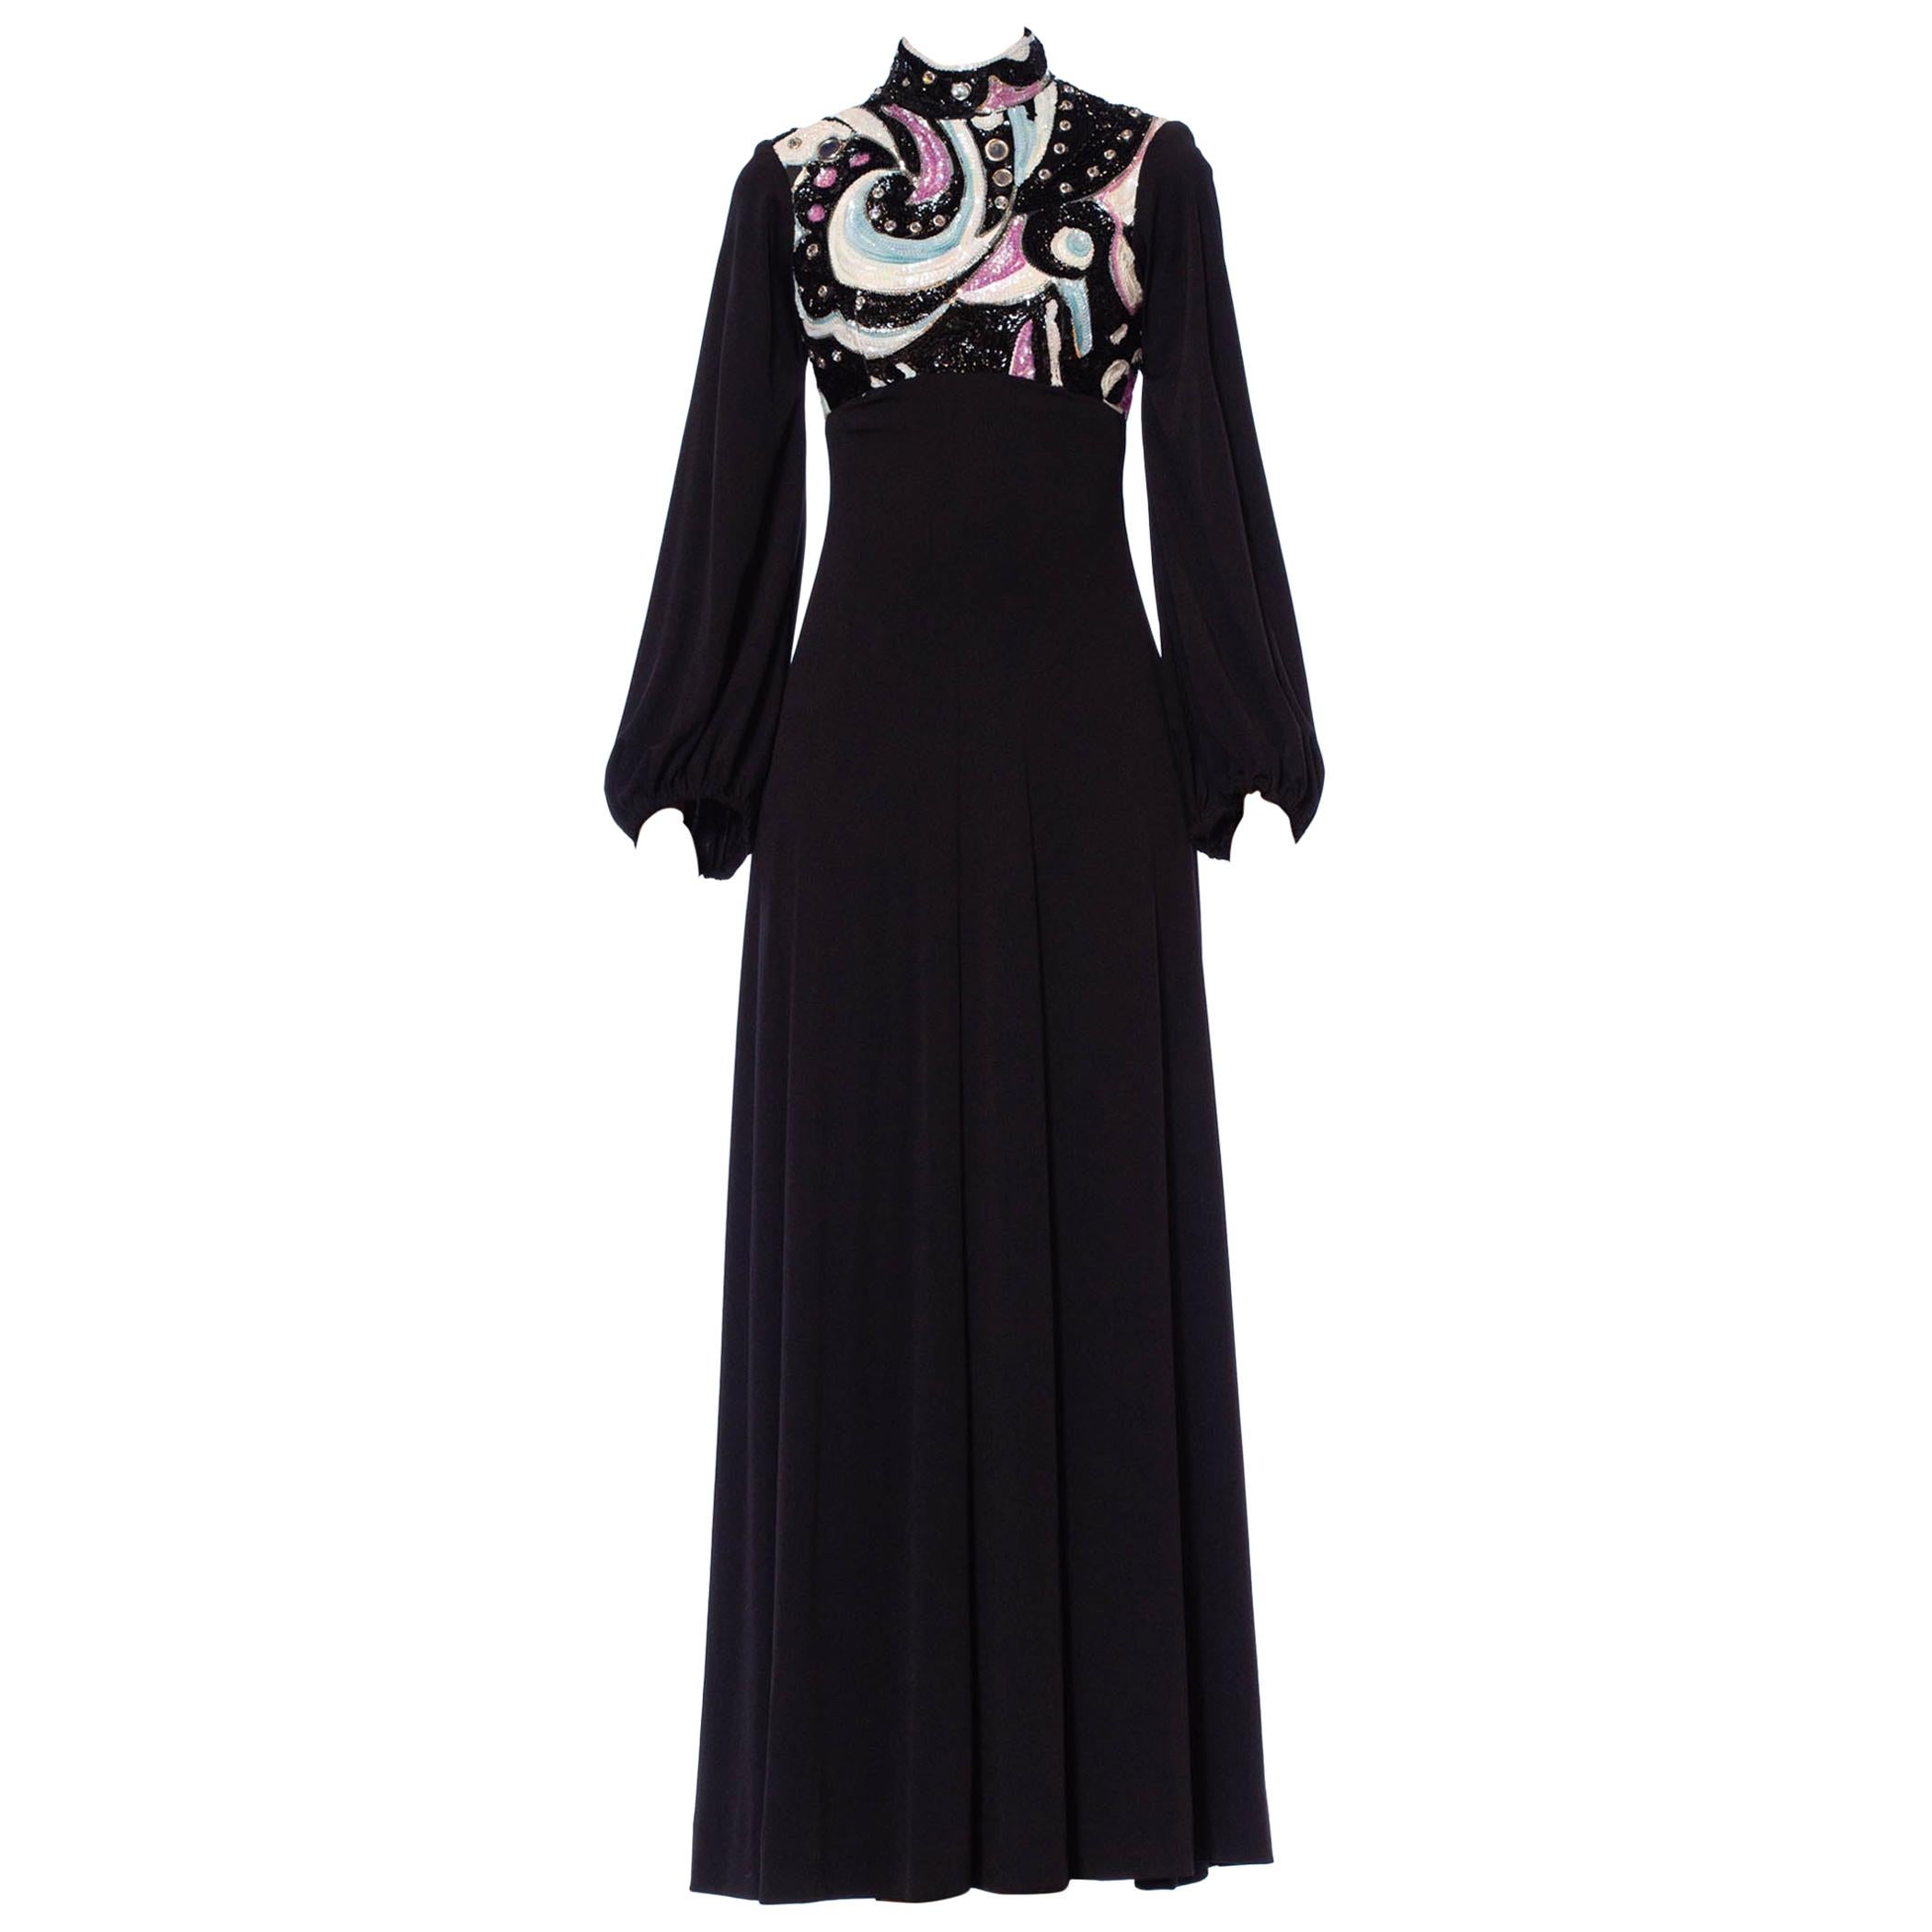 1970S Black Polyester Jersey Psycadellic Beaded Gown Reportedly From The Cher S